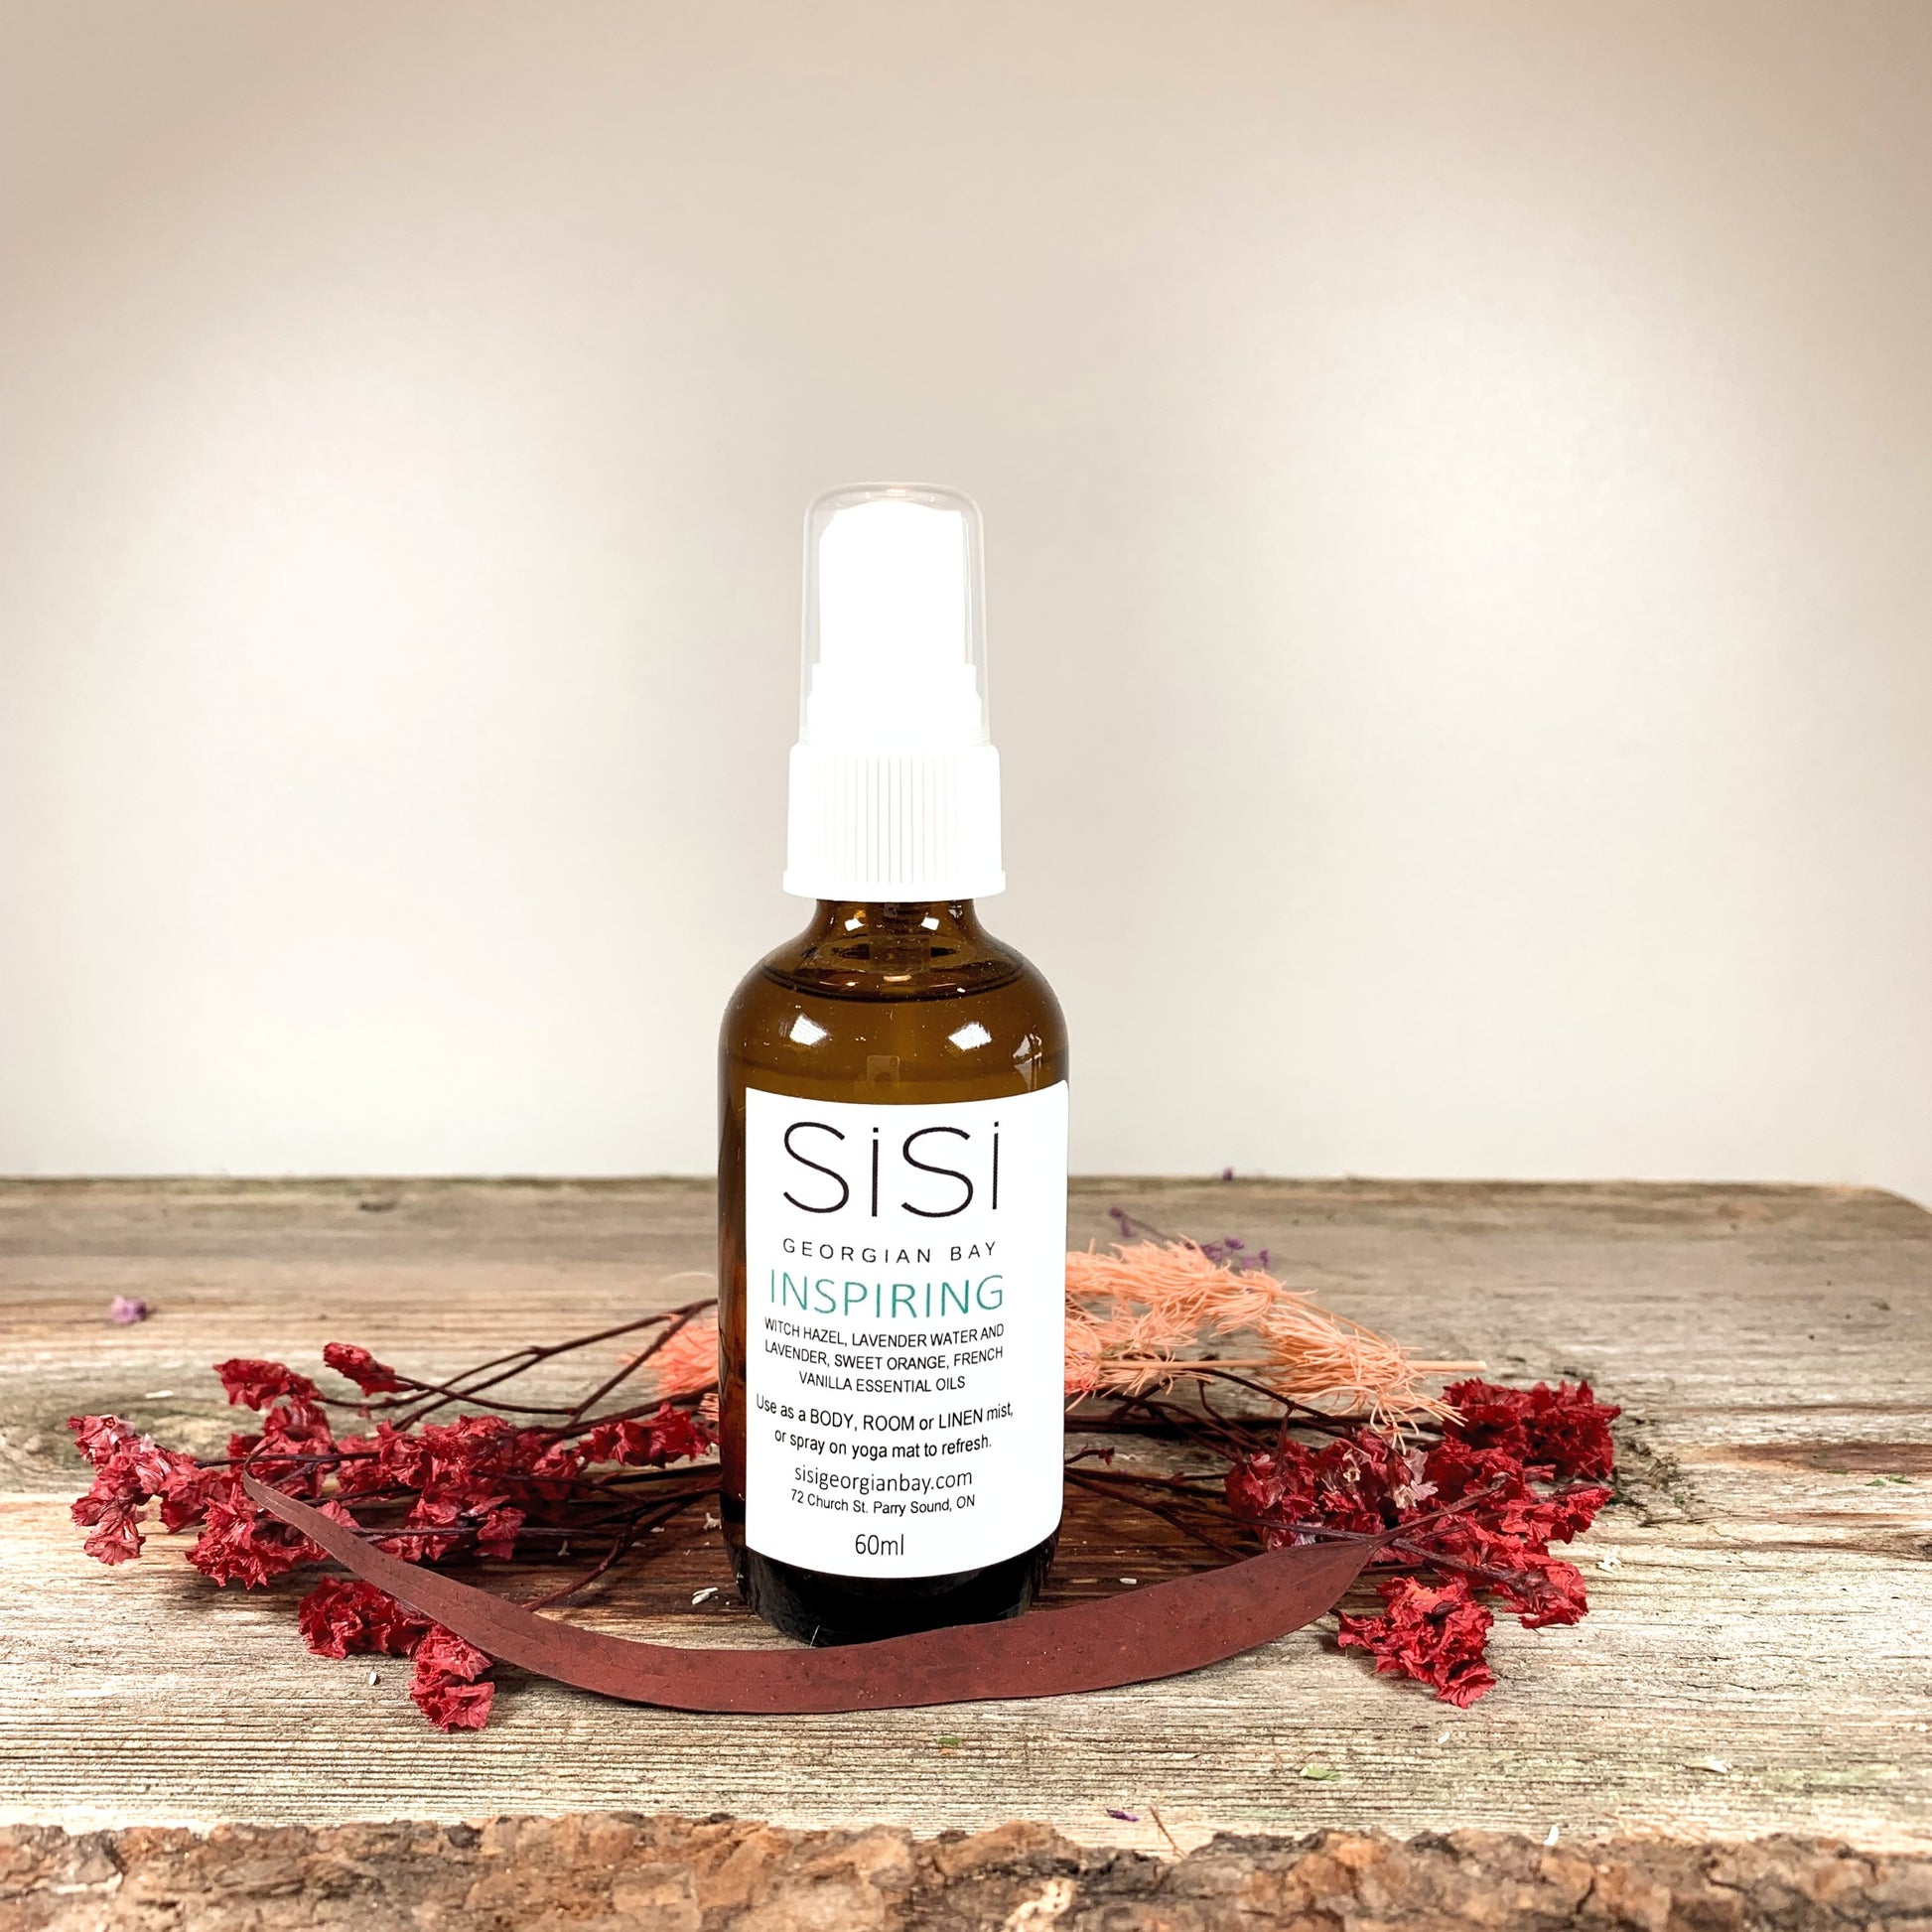 Aromatherapy Products - SiSi Georgian Bay Yoga Sprays in amber glass bottles on a rustic wooden live edge surface with flowers spread around the bottom